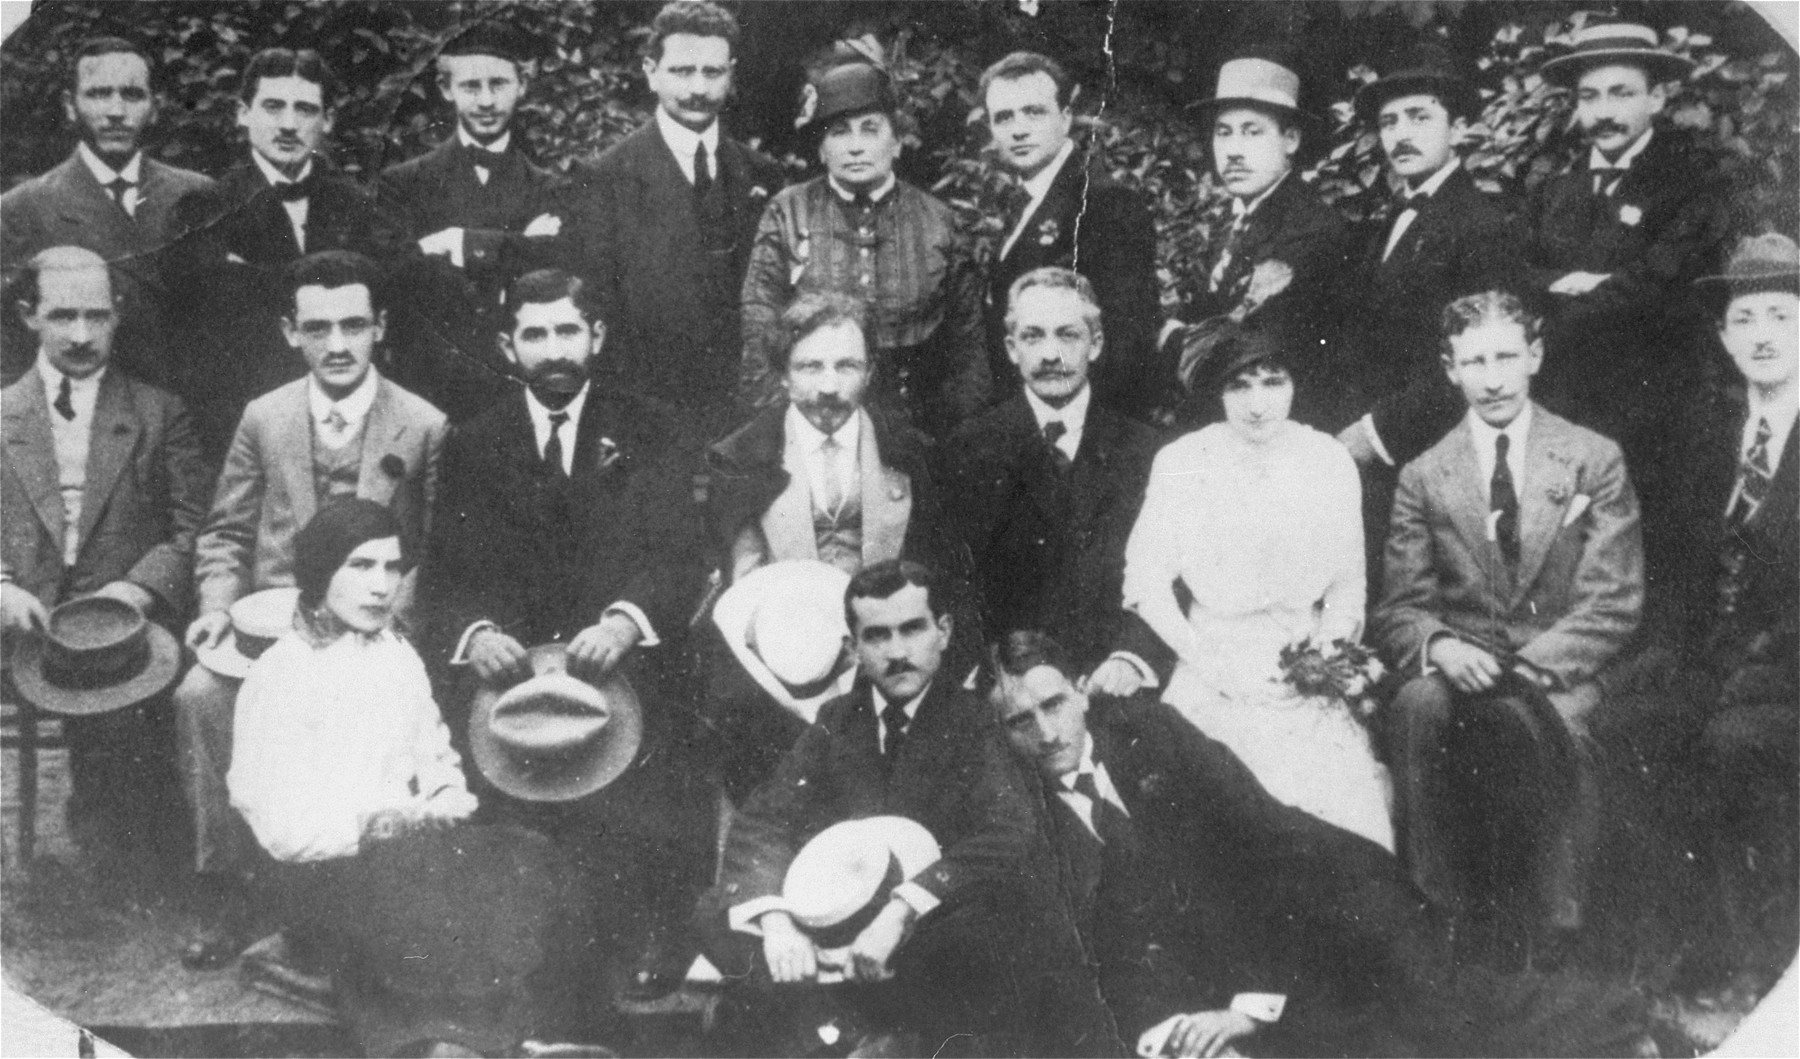 The Yiddish writer Sholem Aleichem poses with prominent members of the Jewish community during his visit to Bedzin. 

Pictured in the back row from left to right are: Icie Wygodzki, Goldsztajn and Abram Liwer.  Sholem Aleichem is seated in the middle row, fourth from the left, holding his hat.